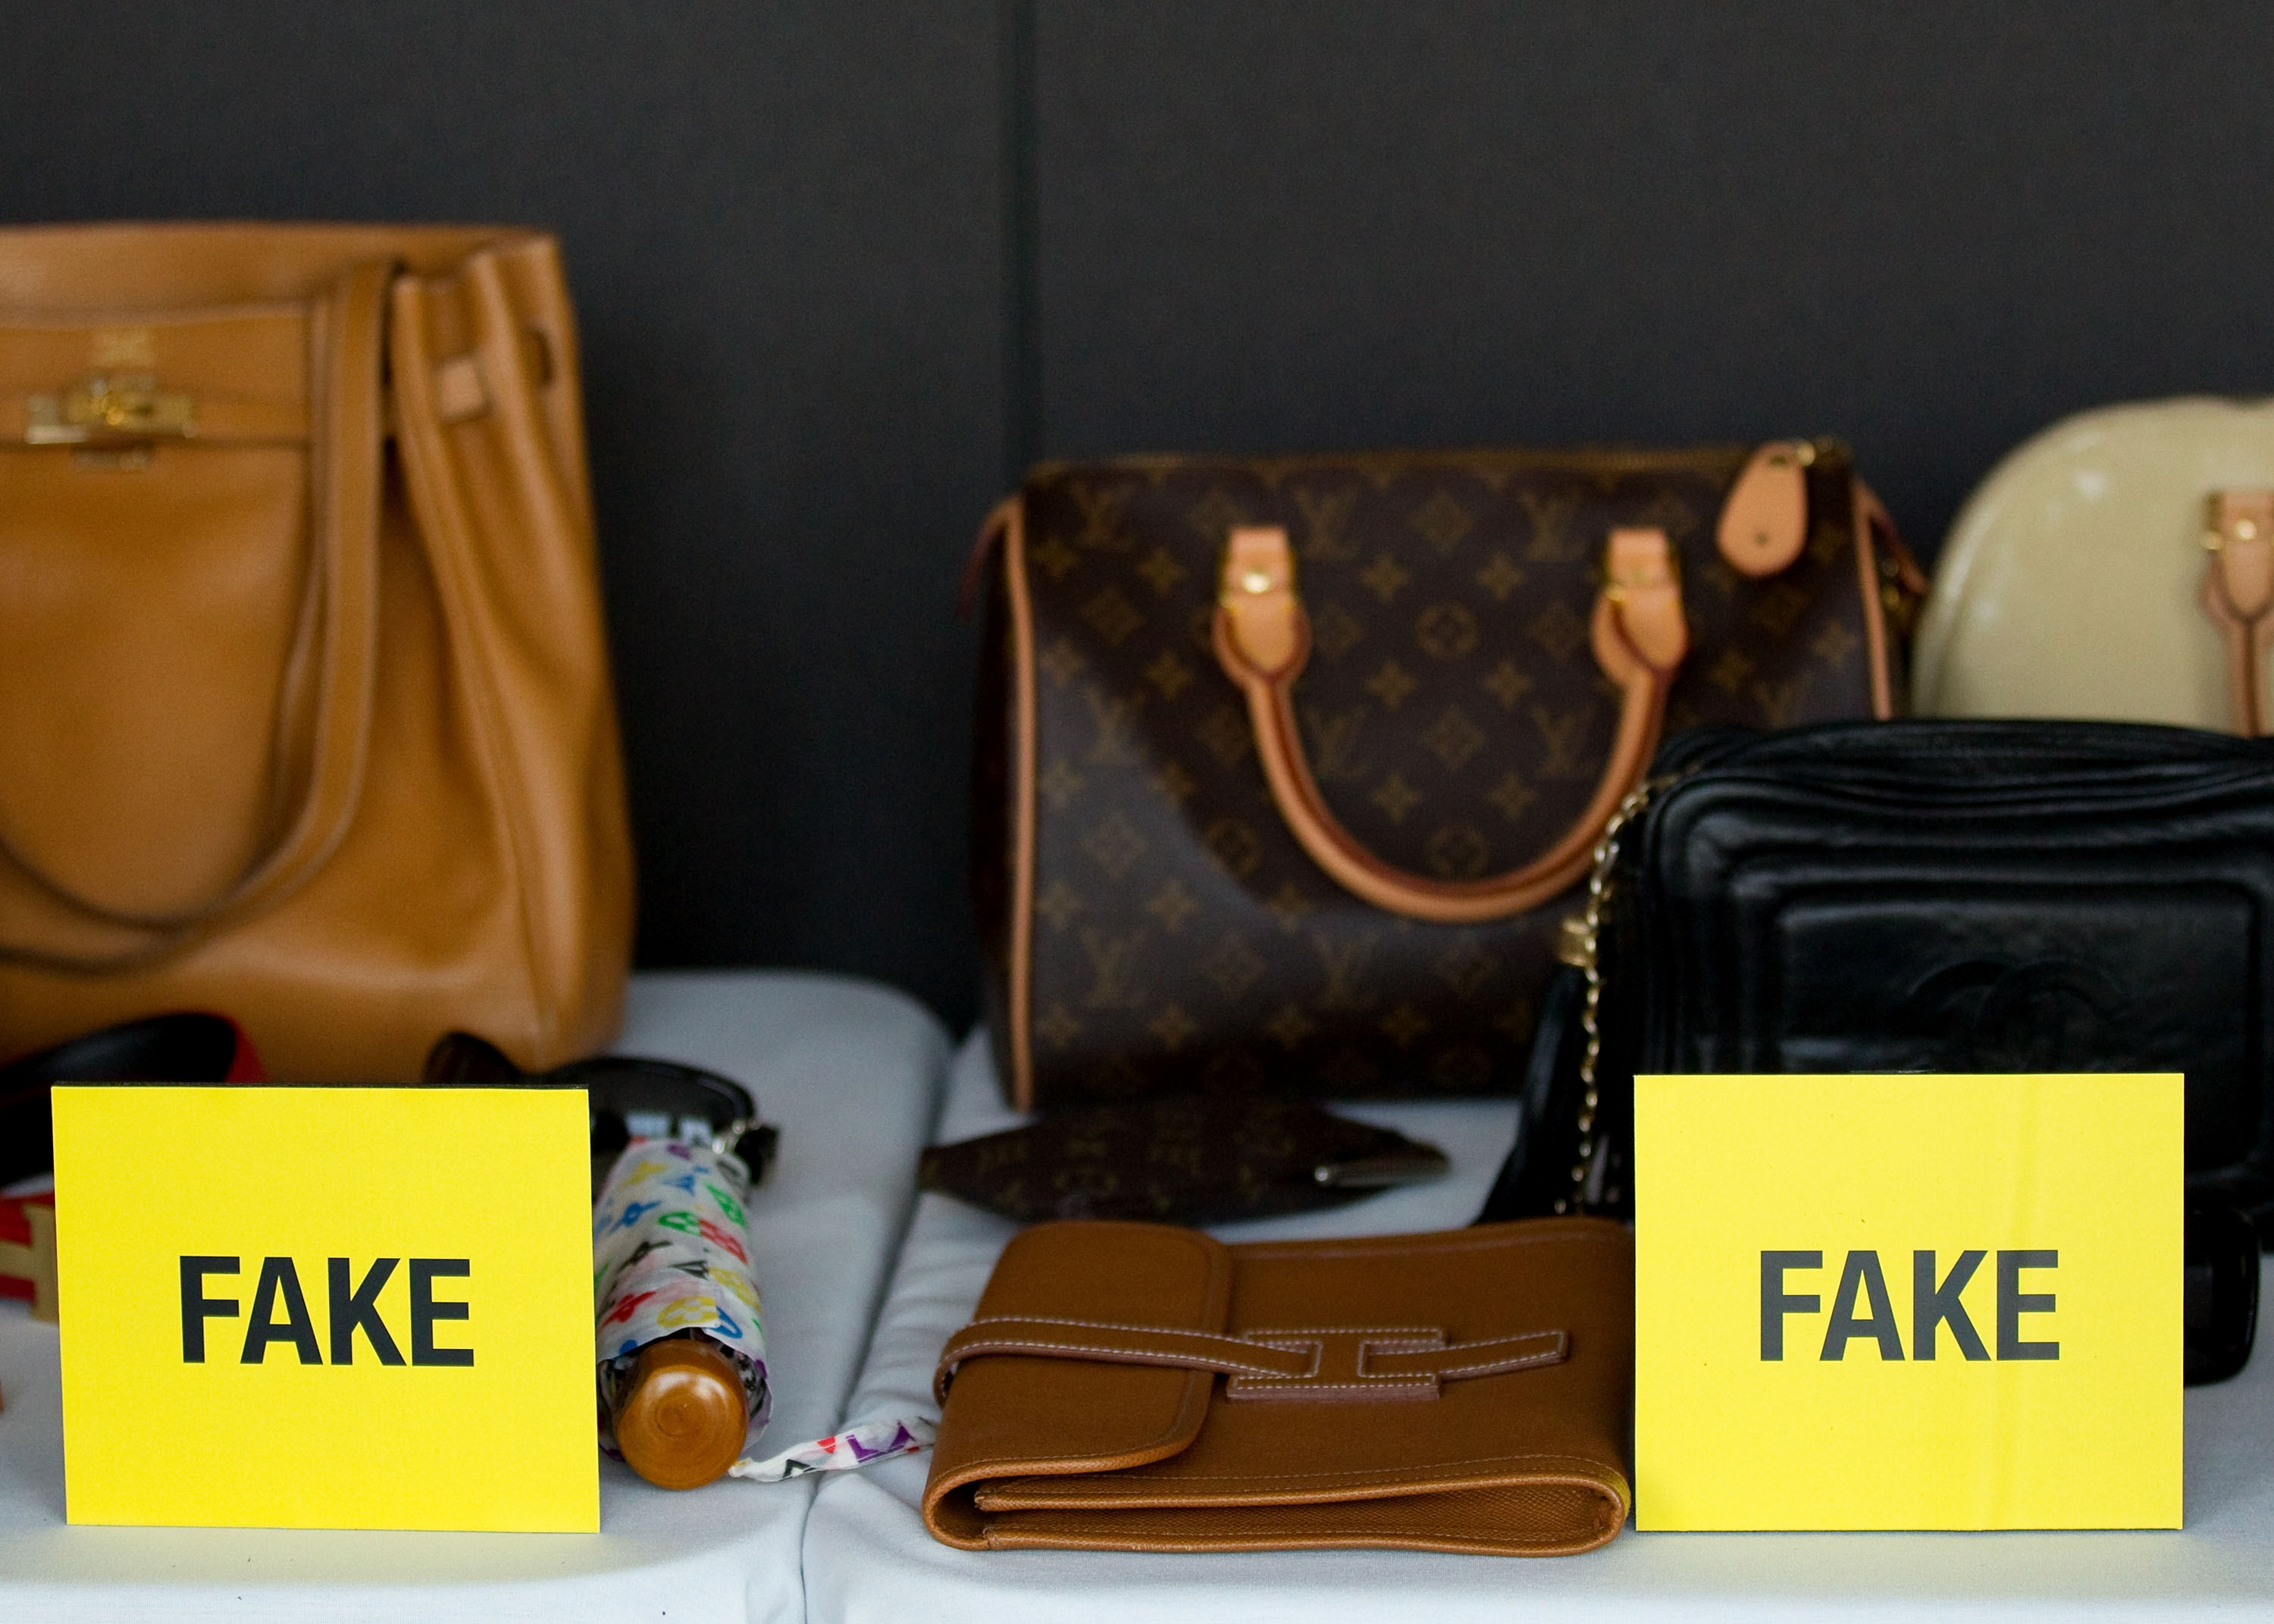 JUST FOR FUN: HOW TO SPOT FAKE LOUIS VUITTON BAGS